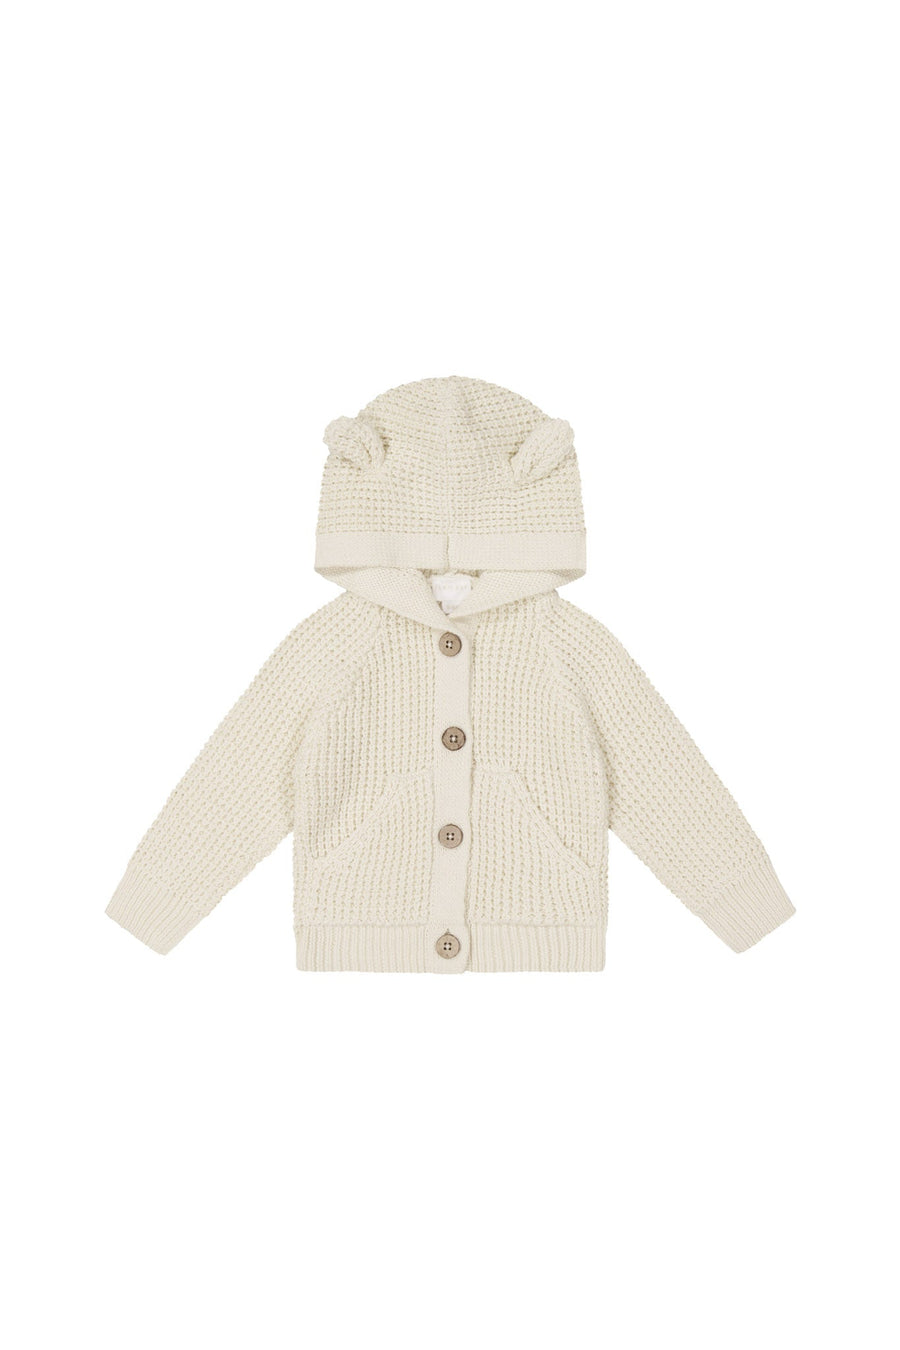 Connor Bear Cardigan - Oat Childrens Cardigan from Jamie Kay USA